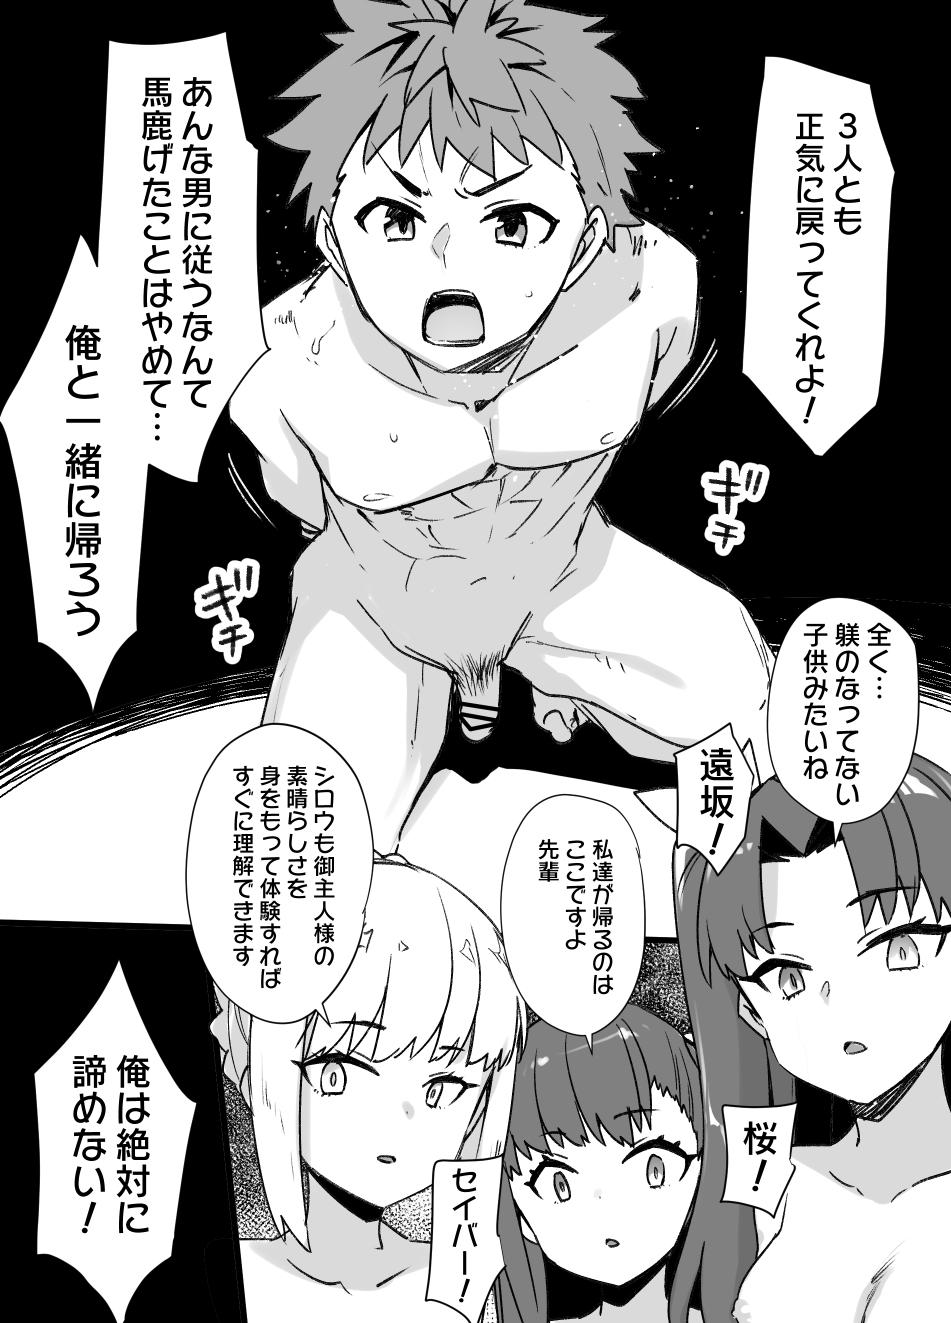 Homemade A manga about Shirou Emiya who went to save Rin Tohsaka from captivity and is transformed into a female slave through physical feminization and brainwashing[Fate/ stay night) - Fate stay night Pussy Play - Page 7